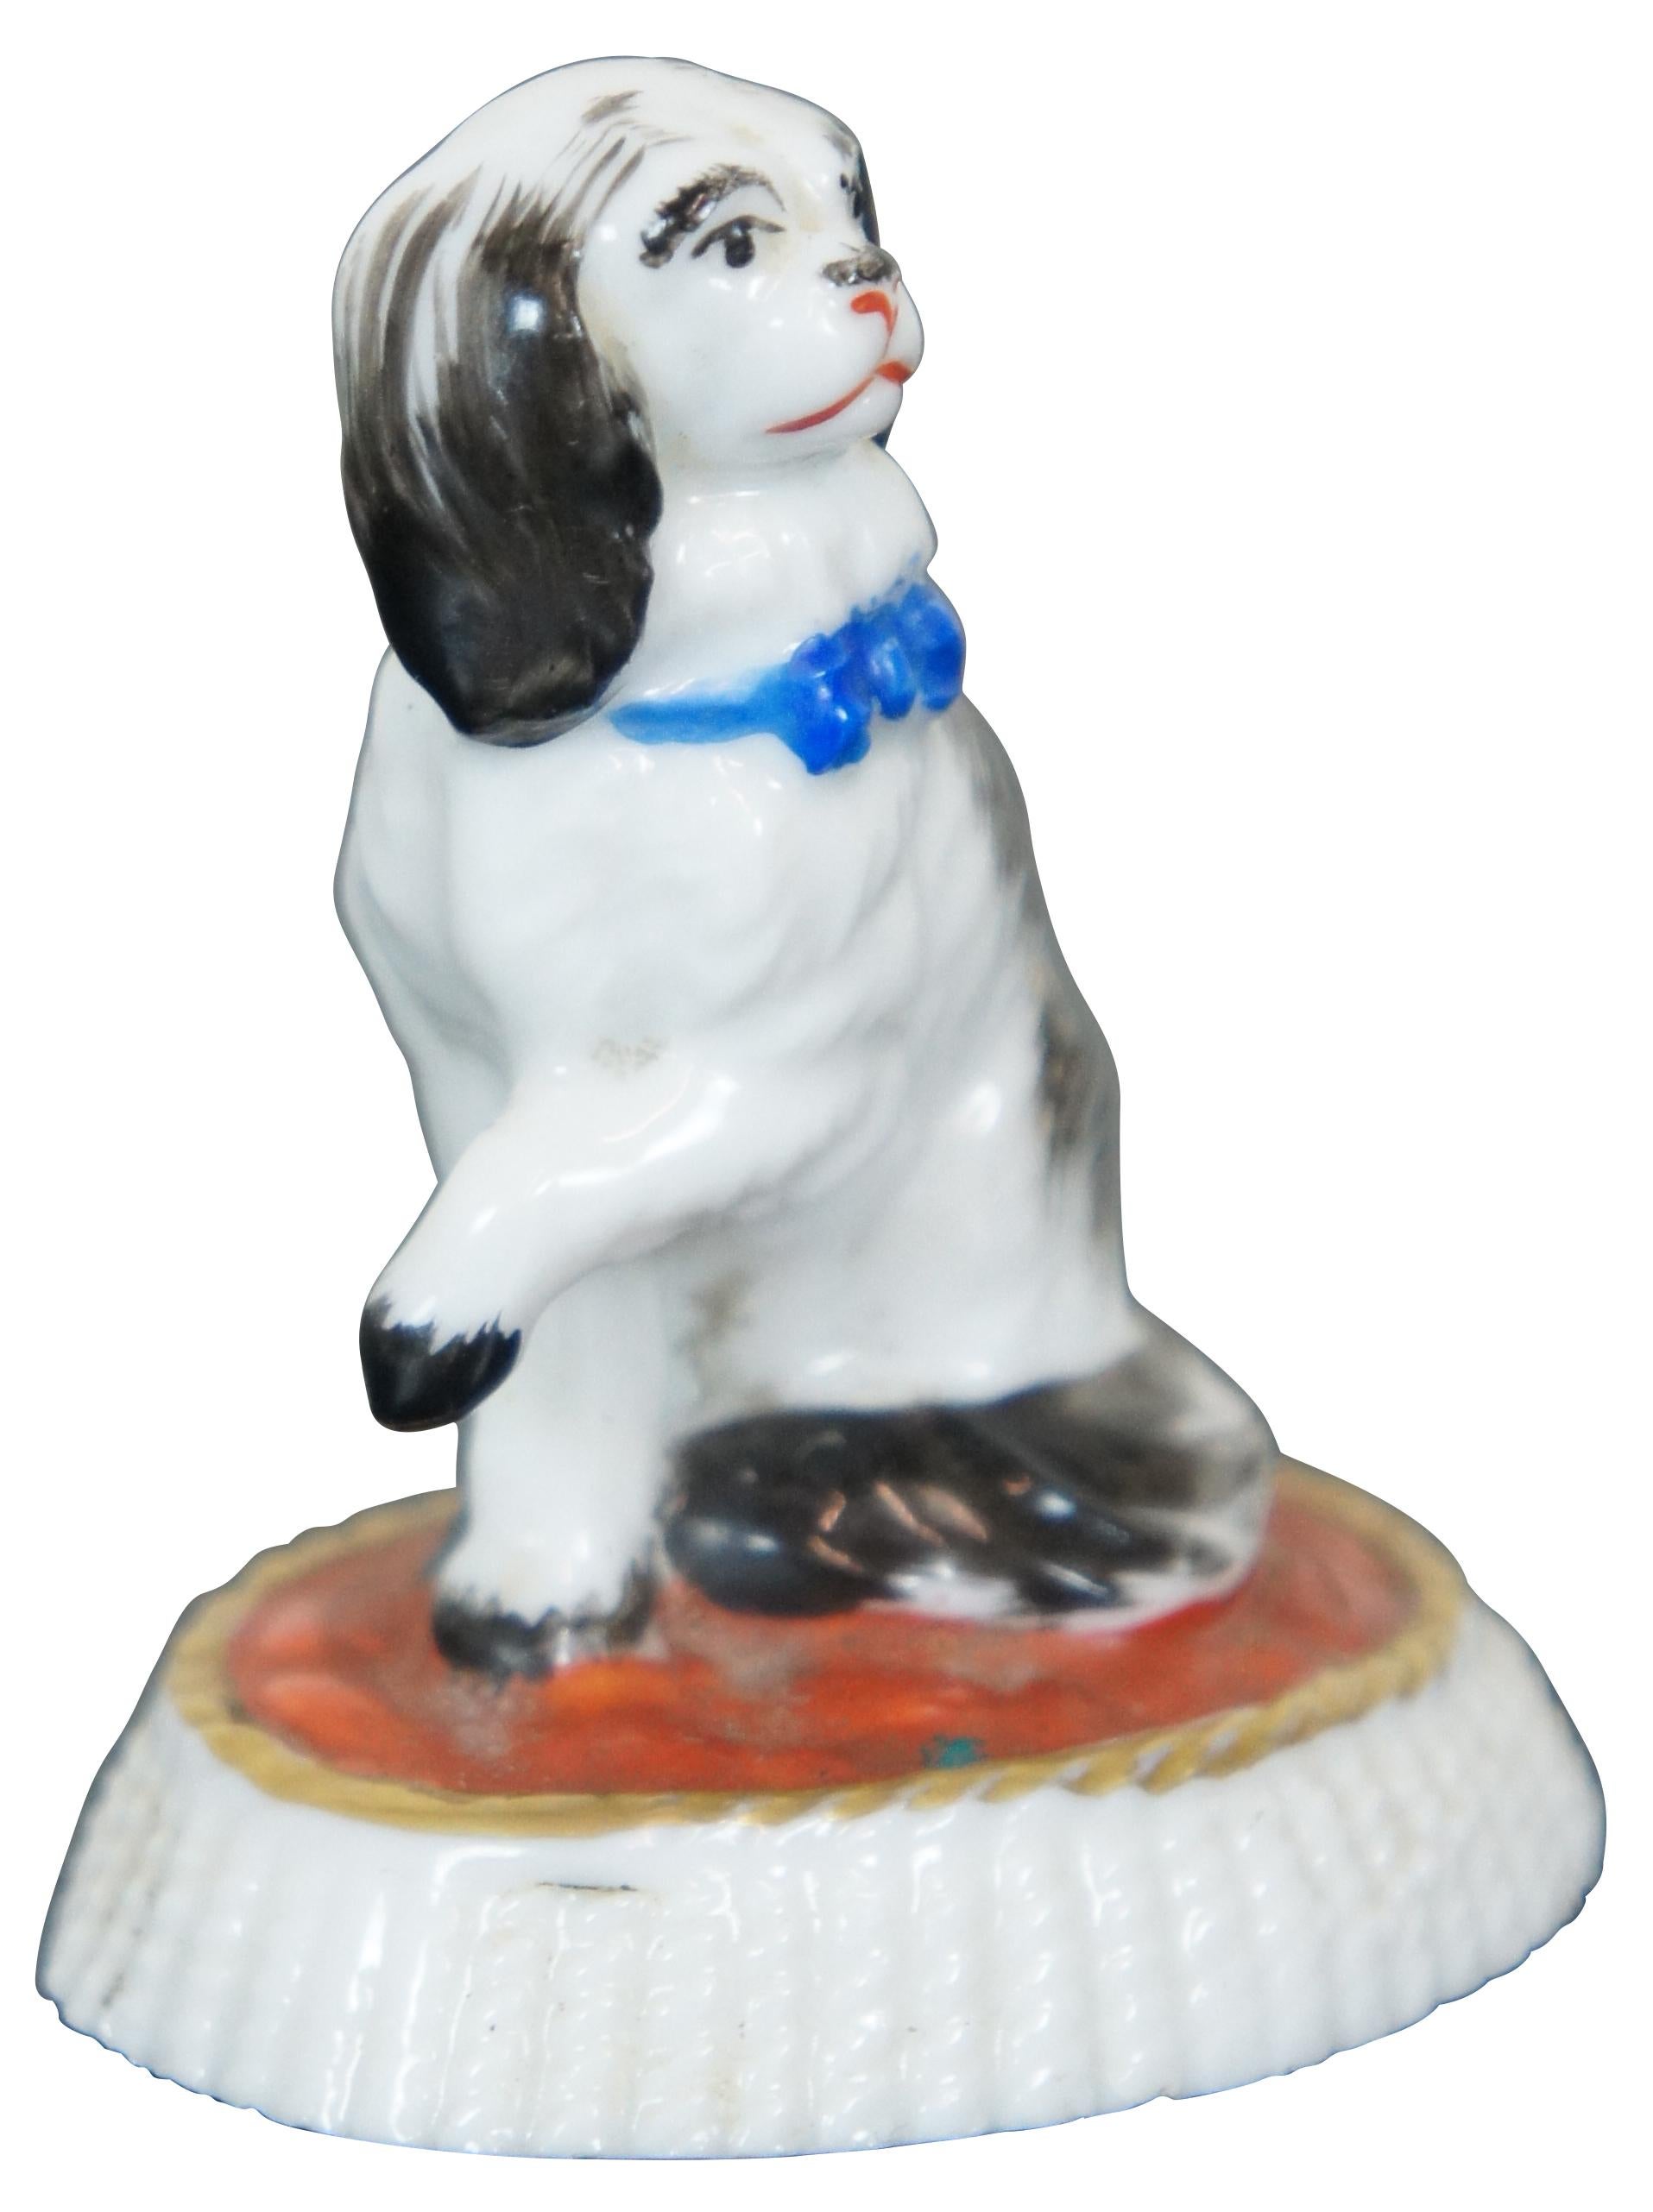 Antique 1885s - 1920s century miniature porcelain figurine in the shape of a black and white spaniel with a blue bow, seated on a red and white fringed cushion. Marked with a Samson golden anchor. This mark was used on German Chelsea Reproductions